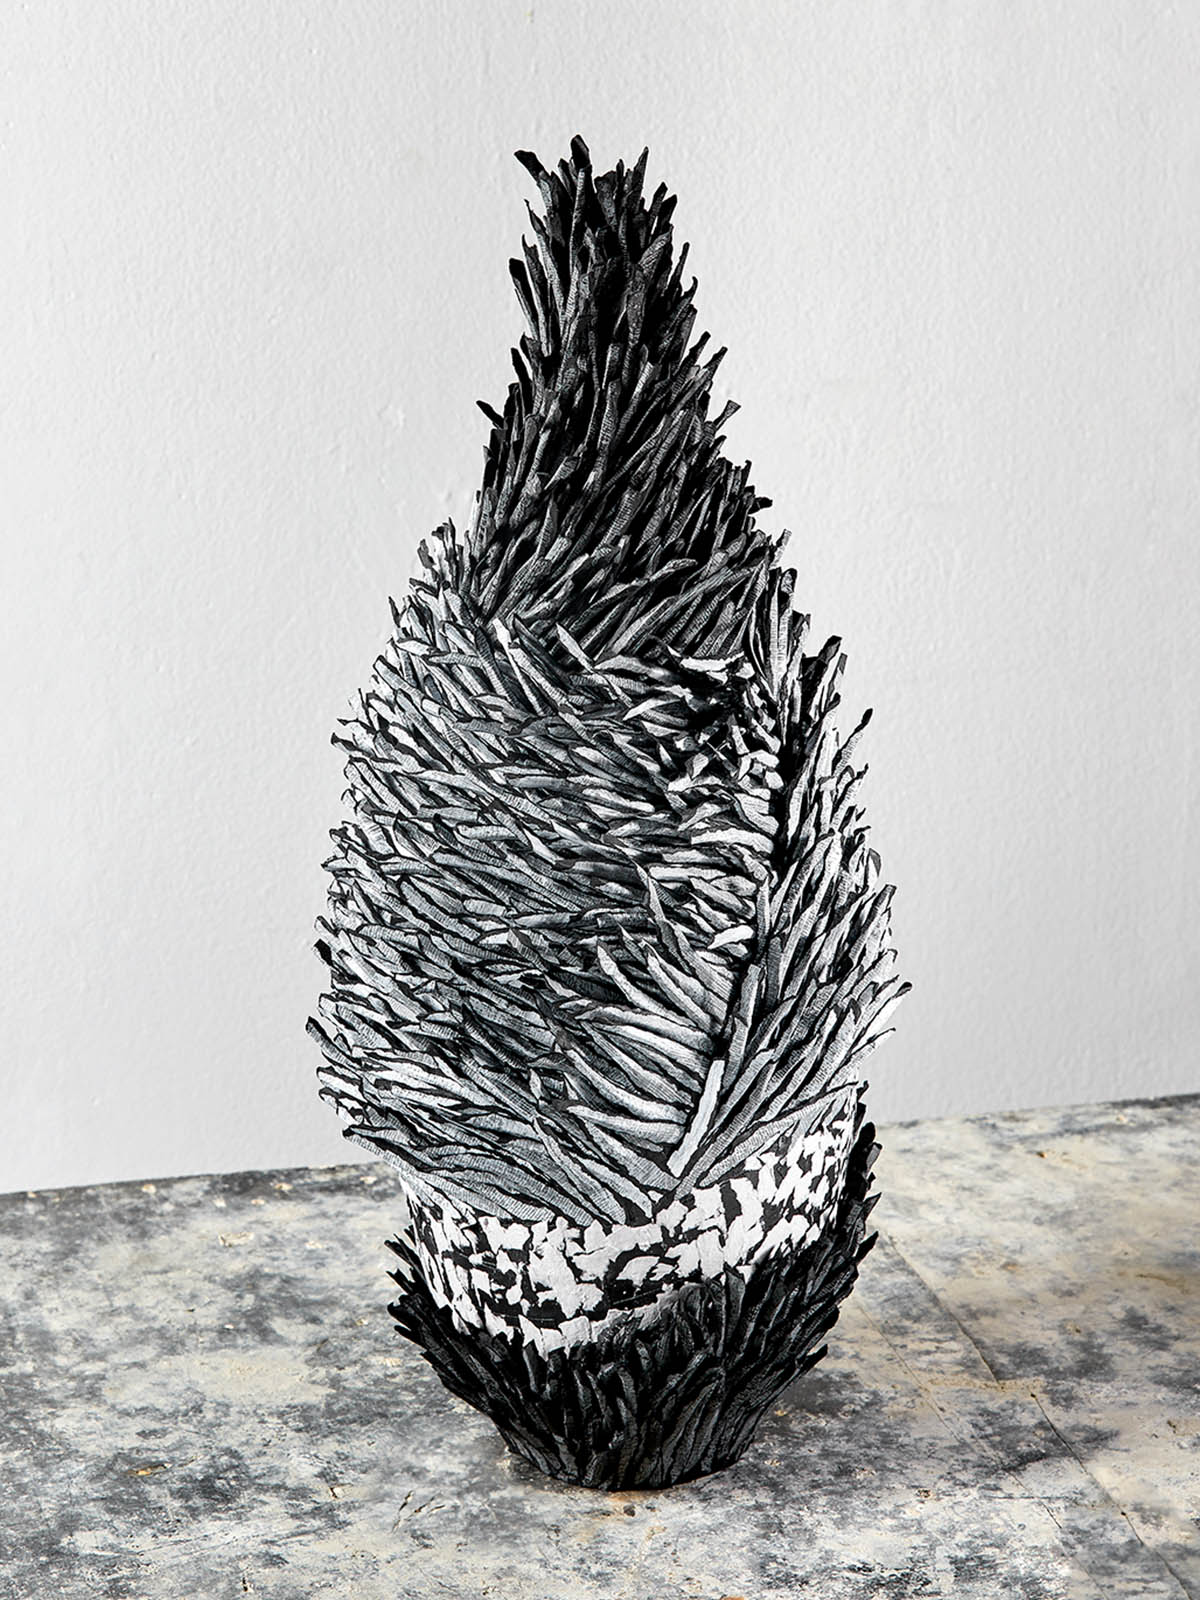 Response to Place. Contemporary Art Vessels by Bianca Severijns